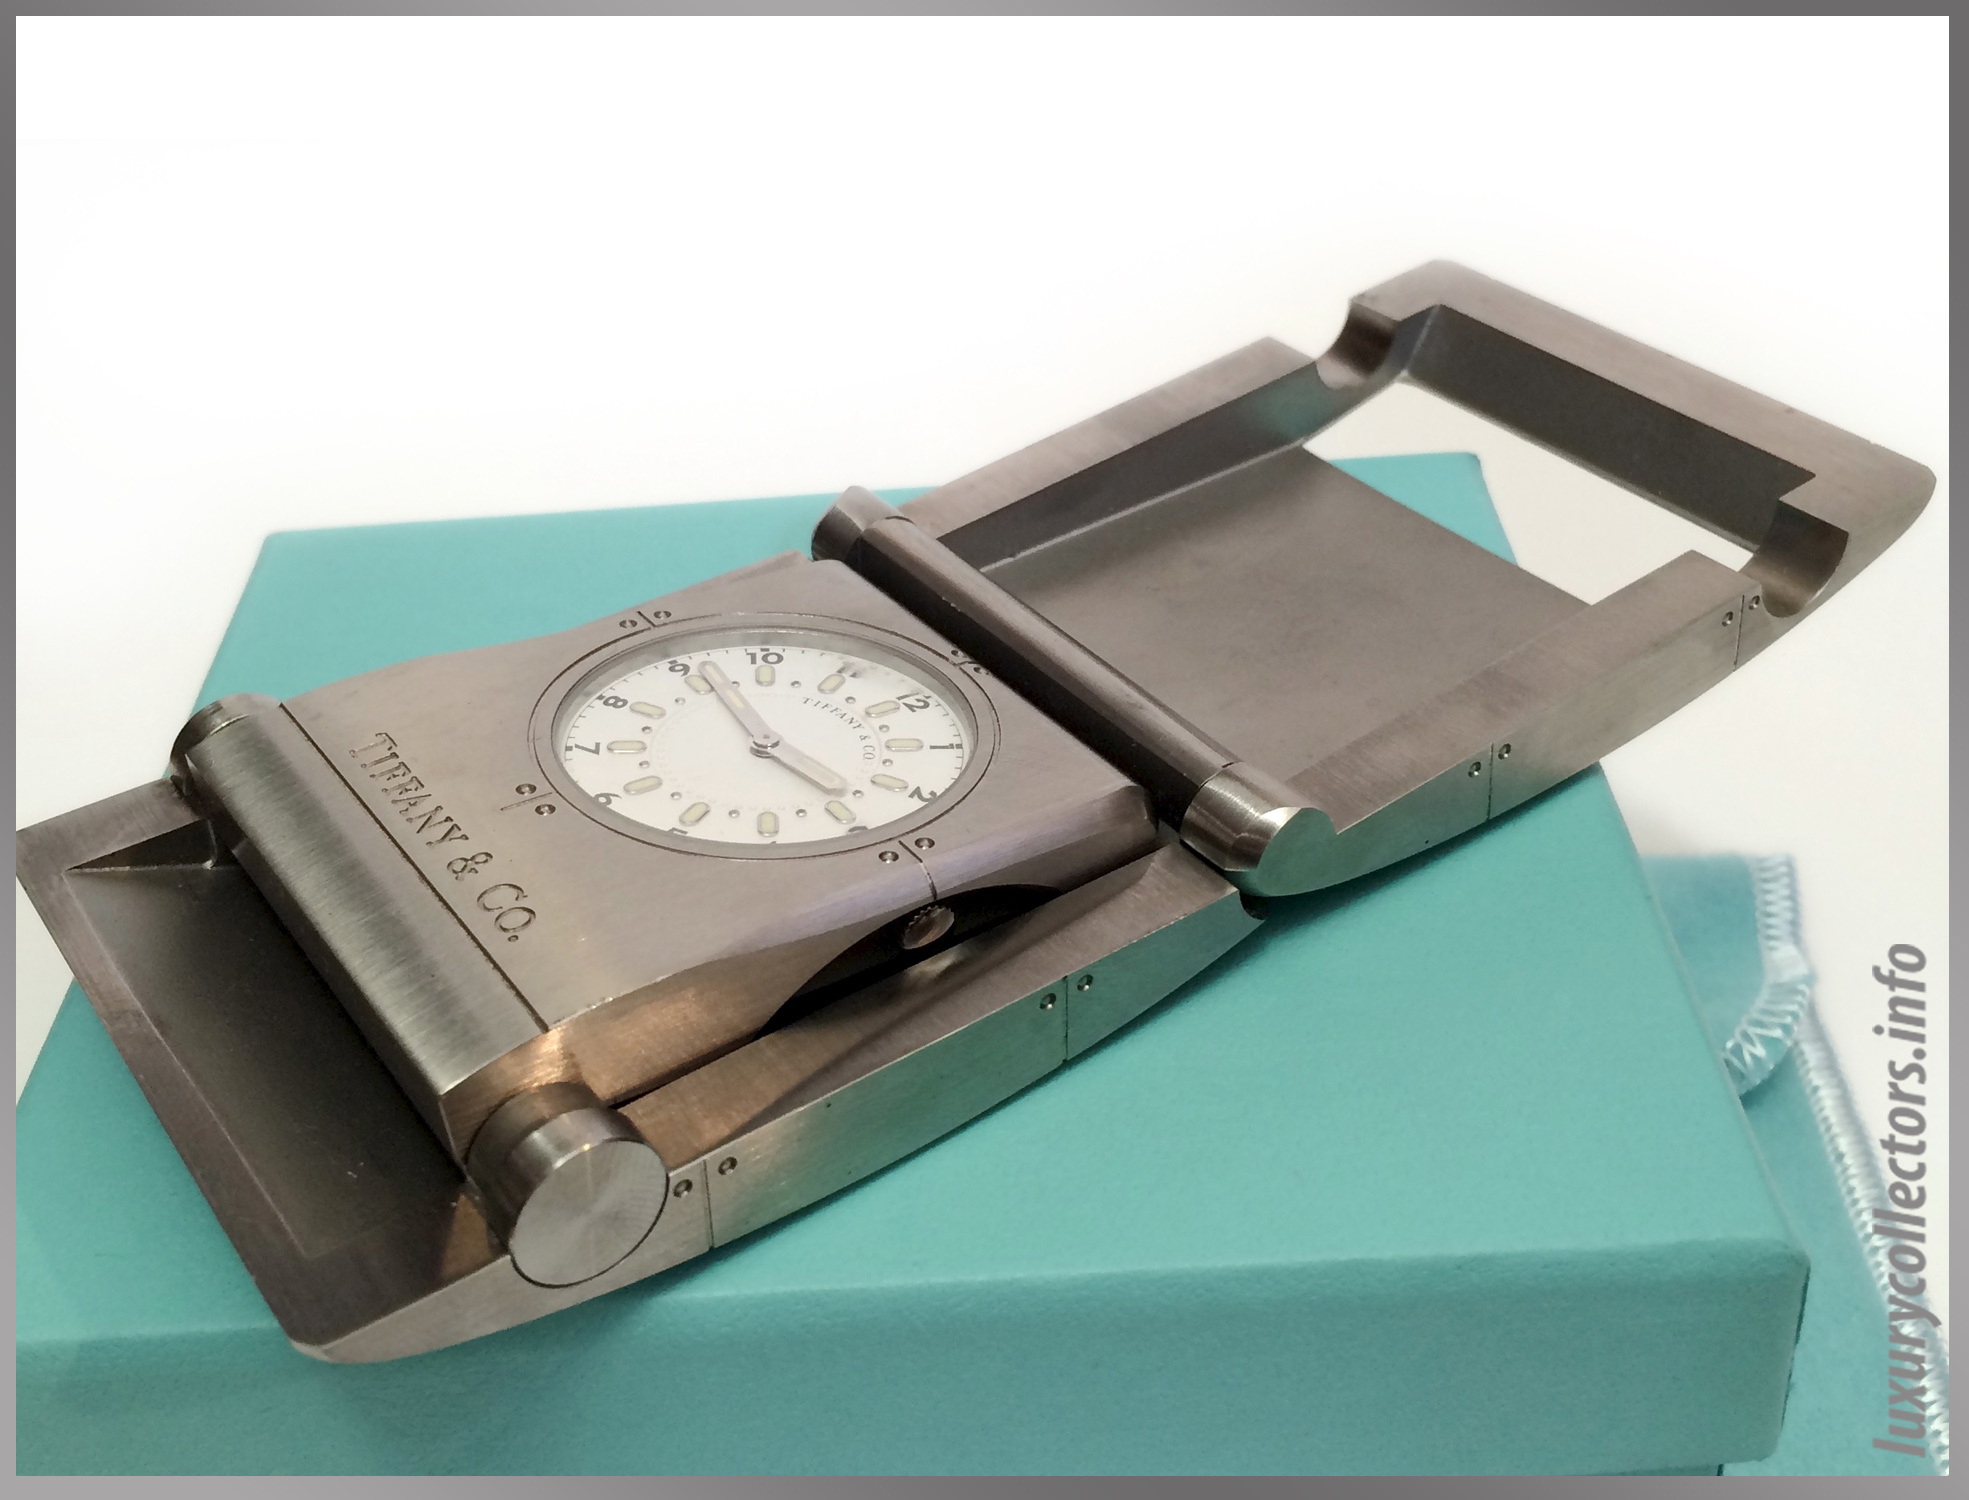 Tiffany & and Co. Streamerica Stainless Steel Metrozone Travel Alarm Clock Time Desk Openned inside